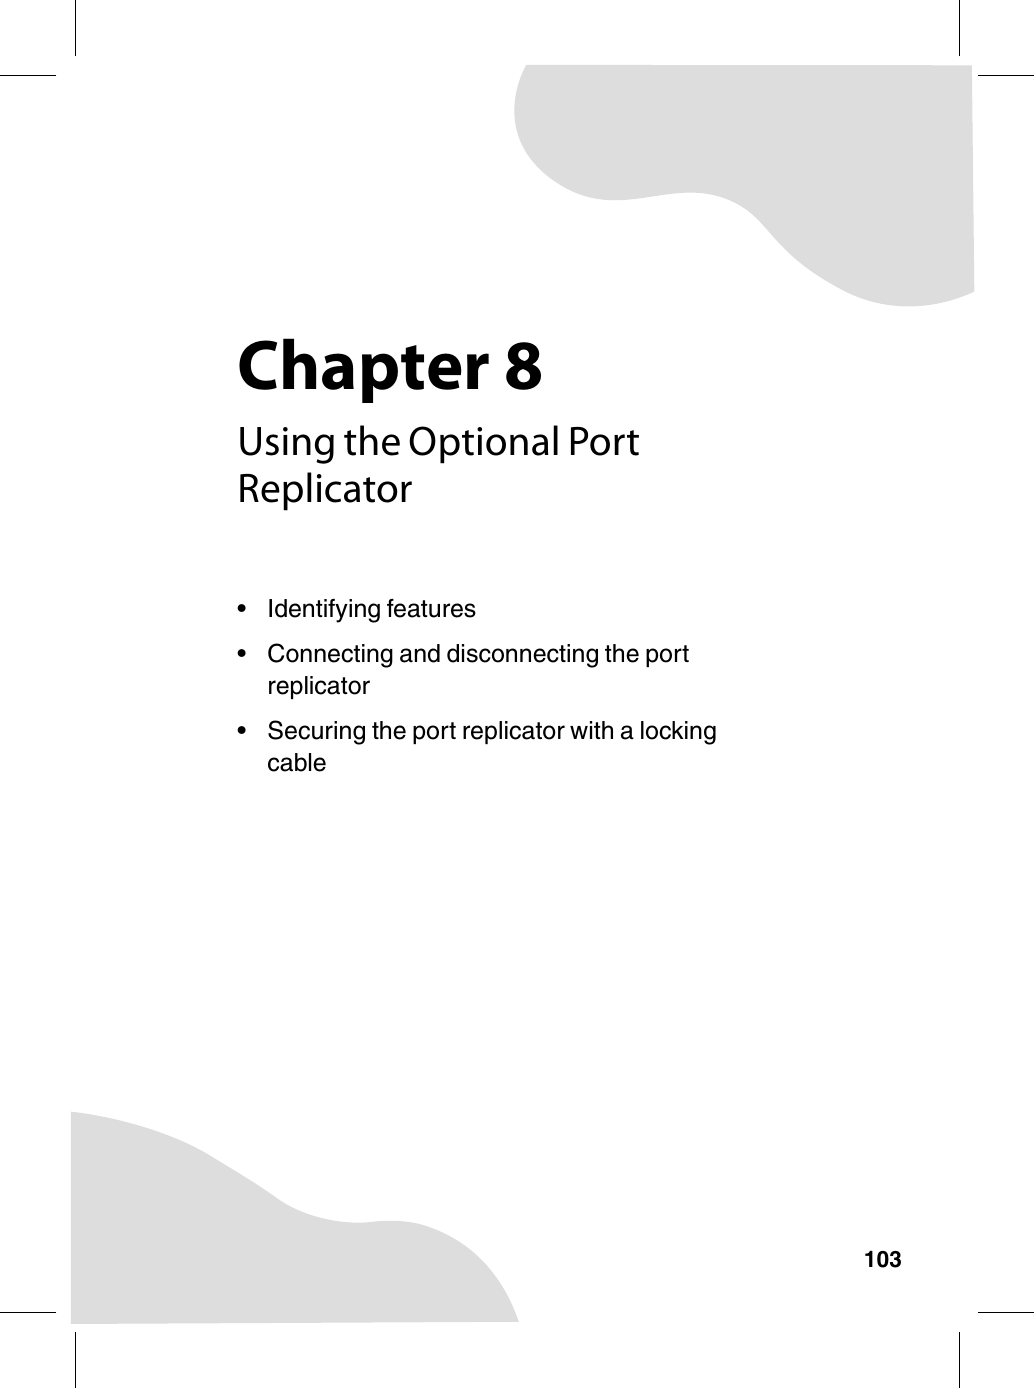 Chapter 8103Using the Optional Port Replicator• Identifying features• Connecting and disconnecting the port replicator• Securing the port replicator with a locking cable